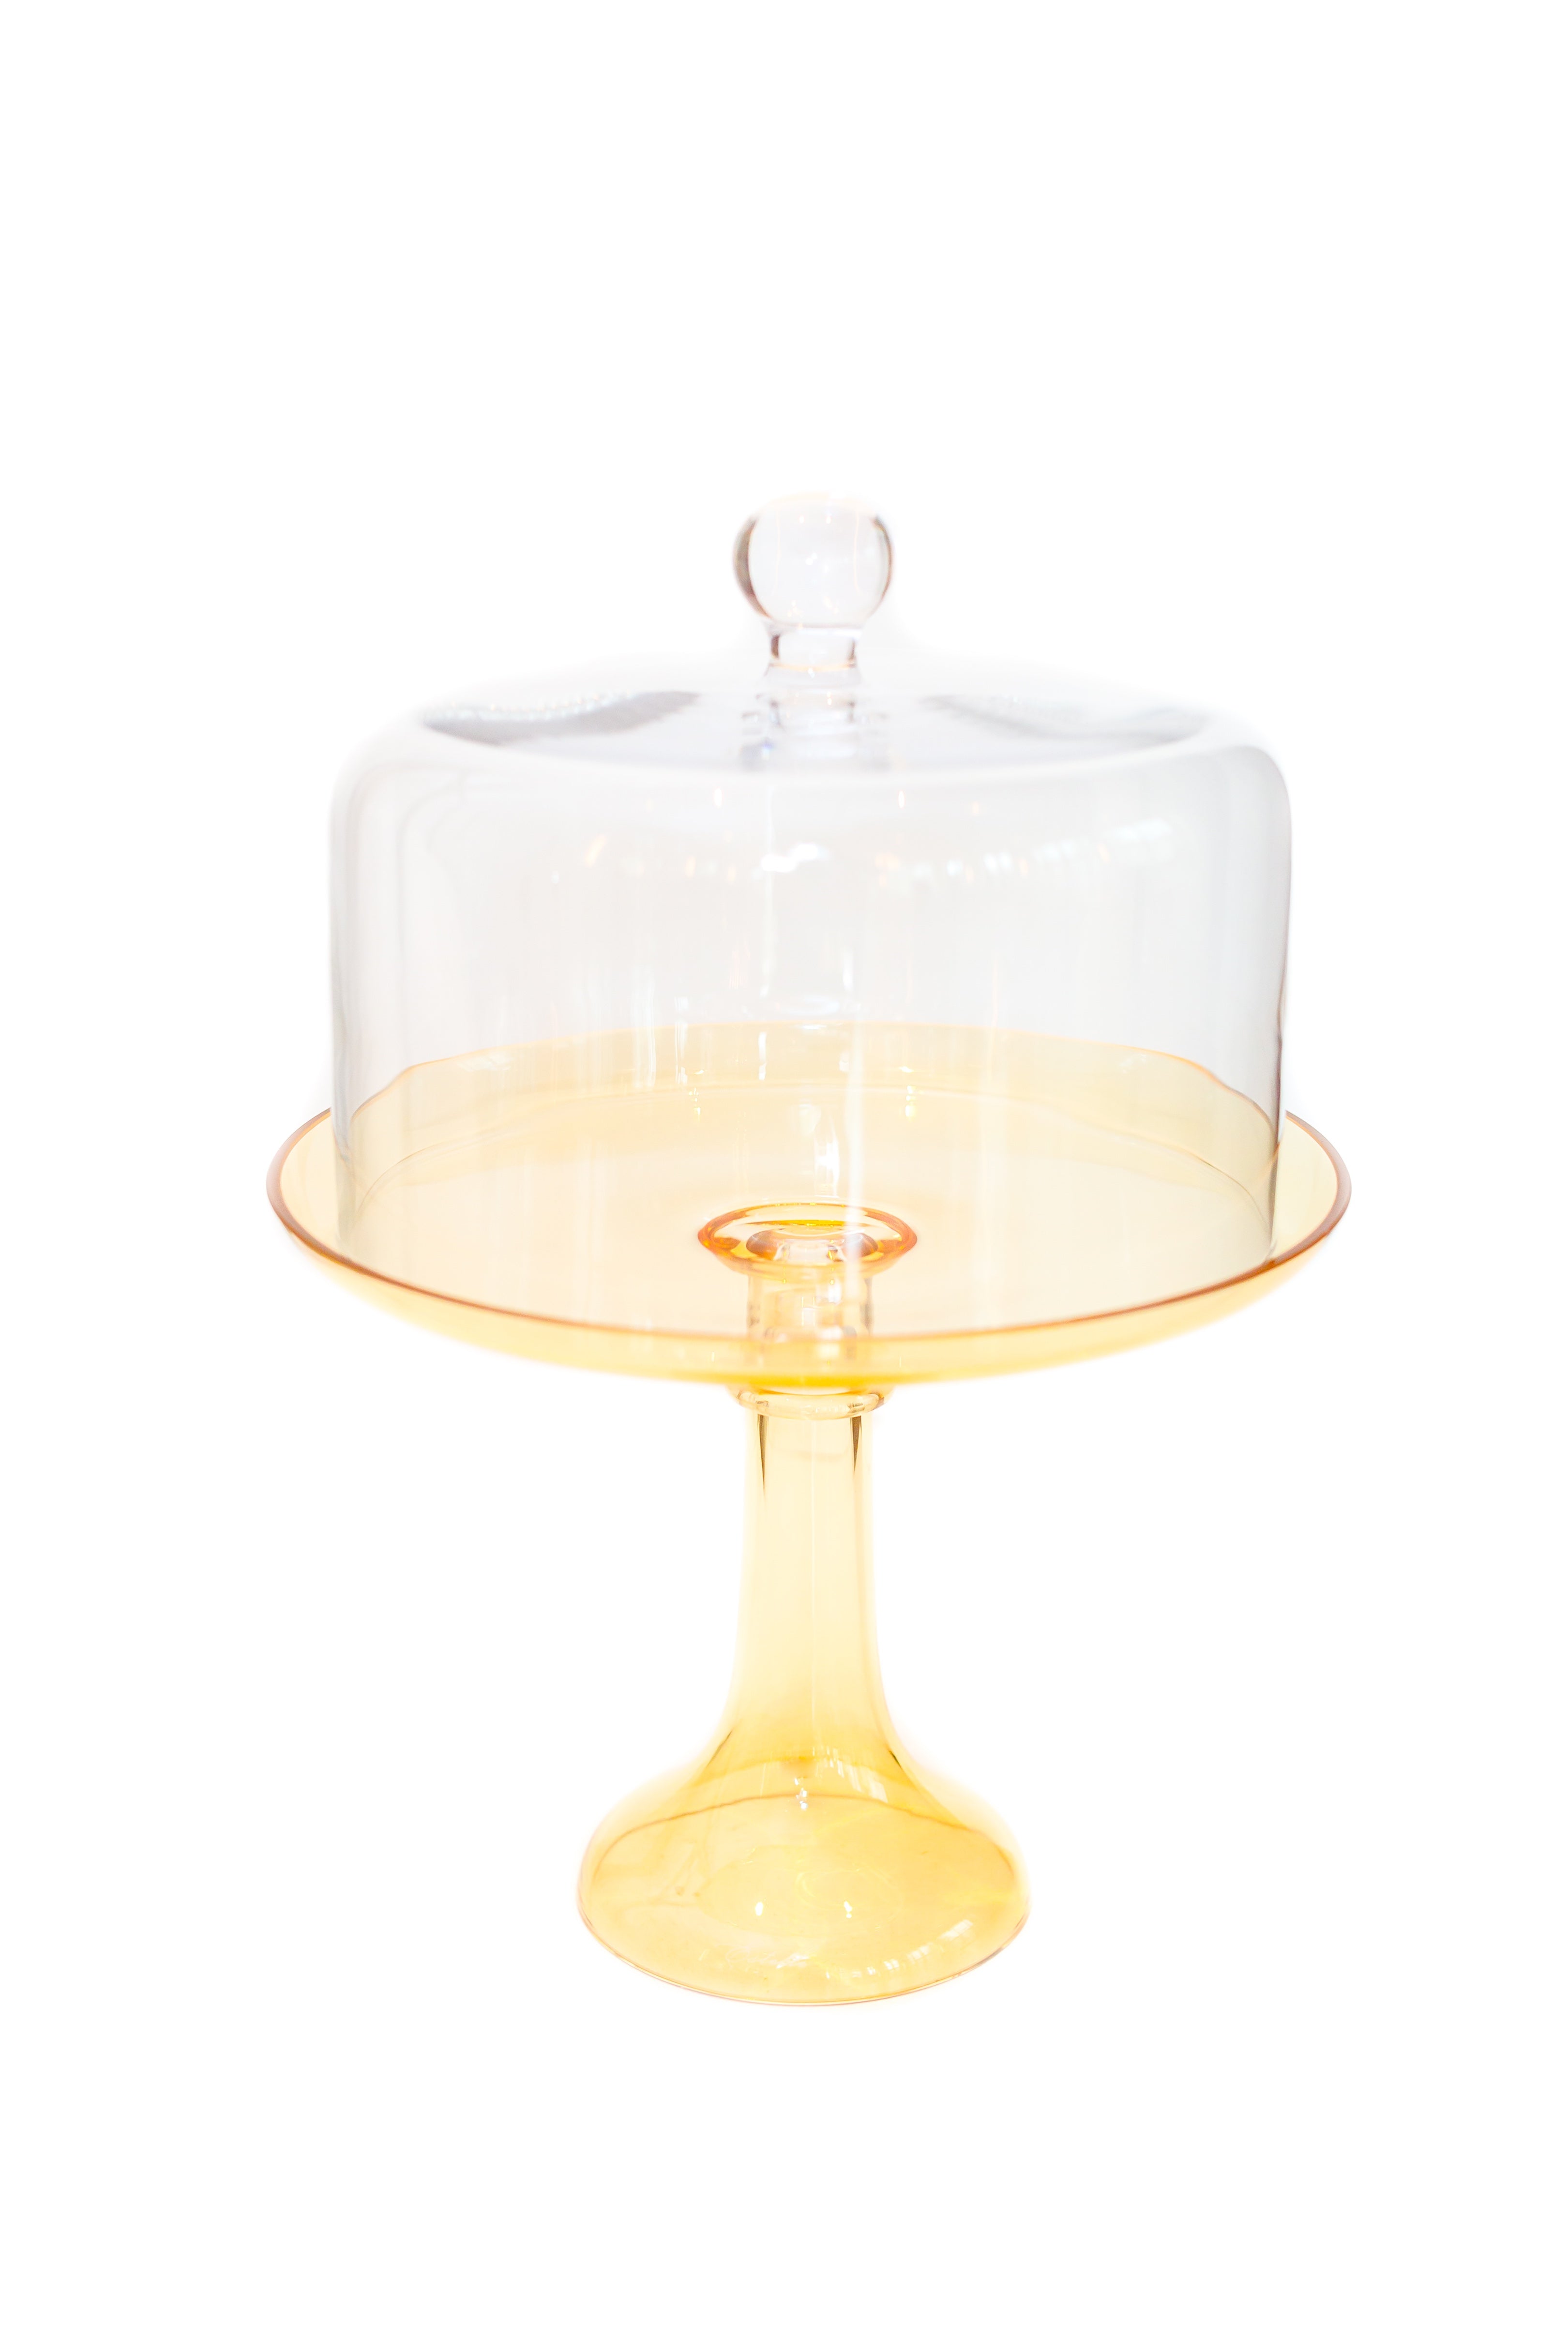 Glass Cake Dome with Natural Wooden Base | Kirklands Home